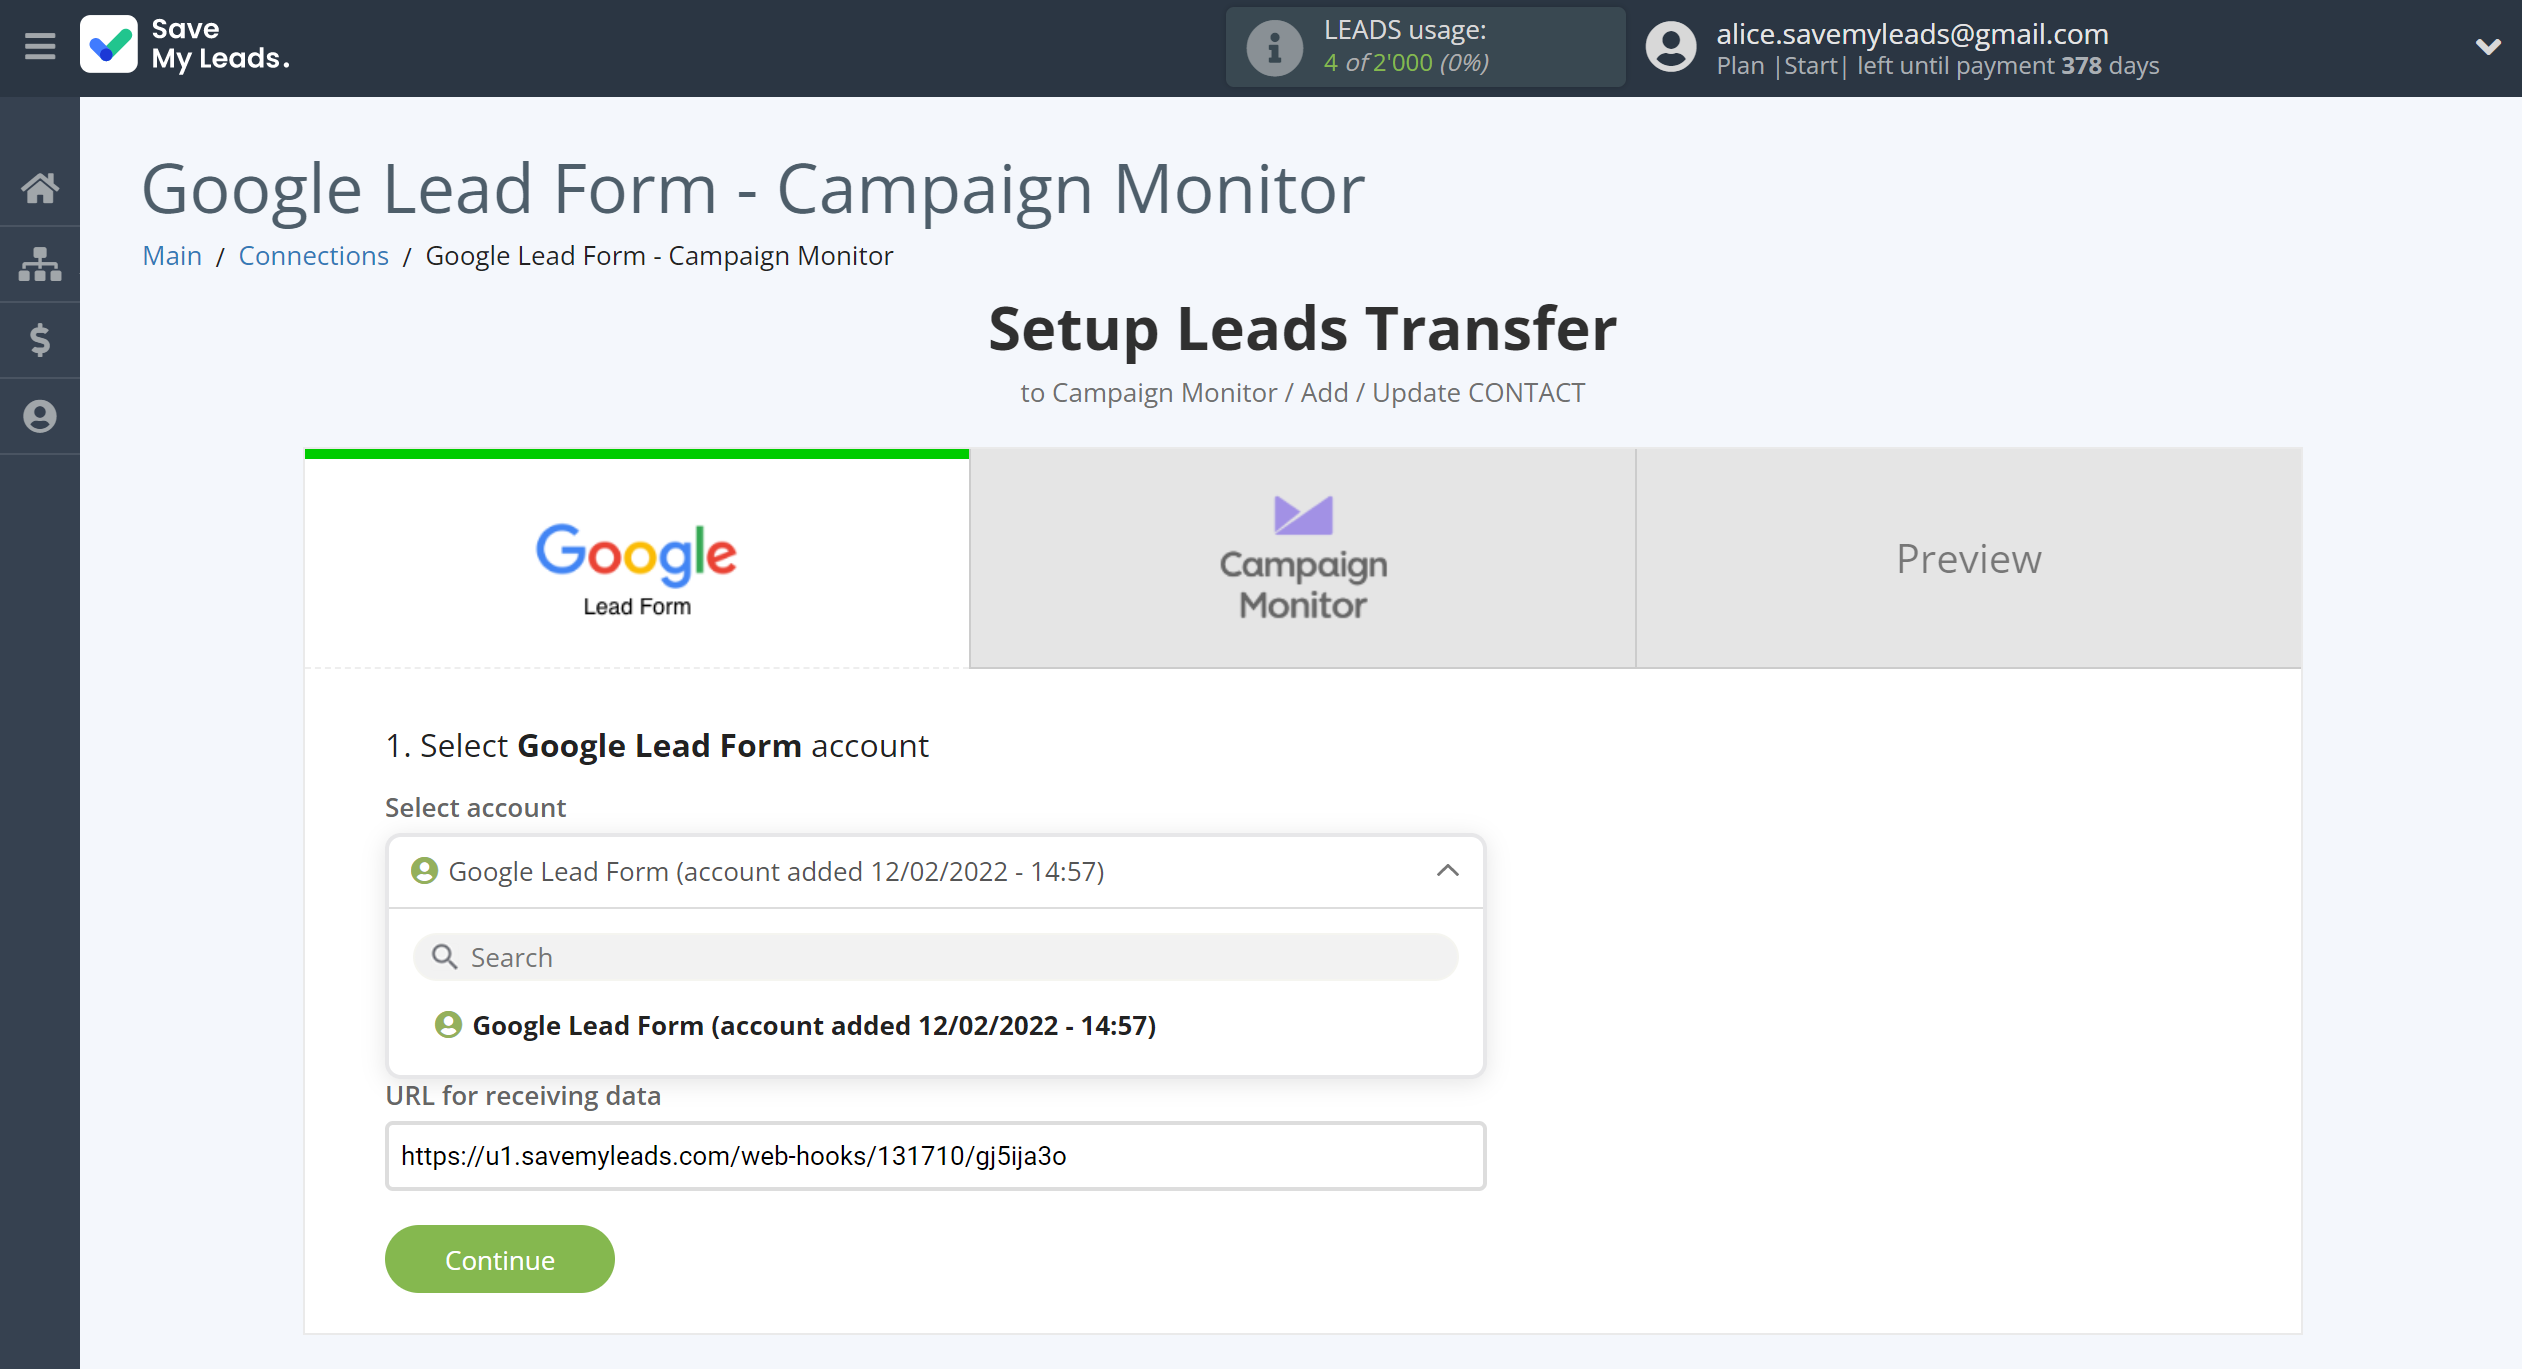 How to Connect Google Lead Form with Campaign Monitor | Data Source account selection